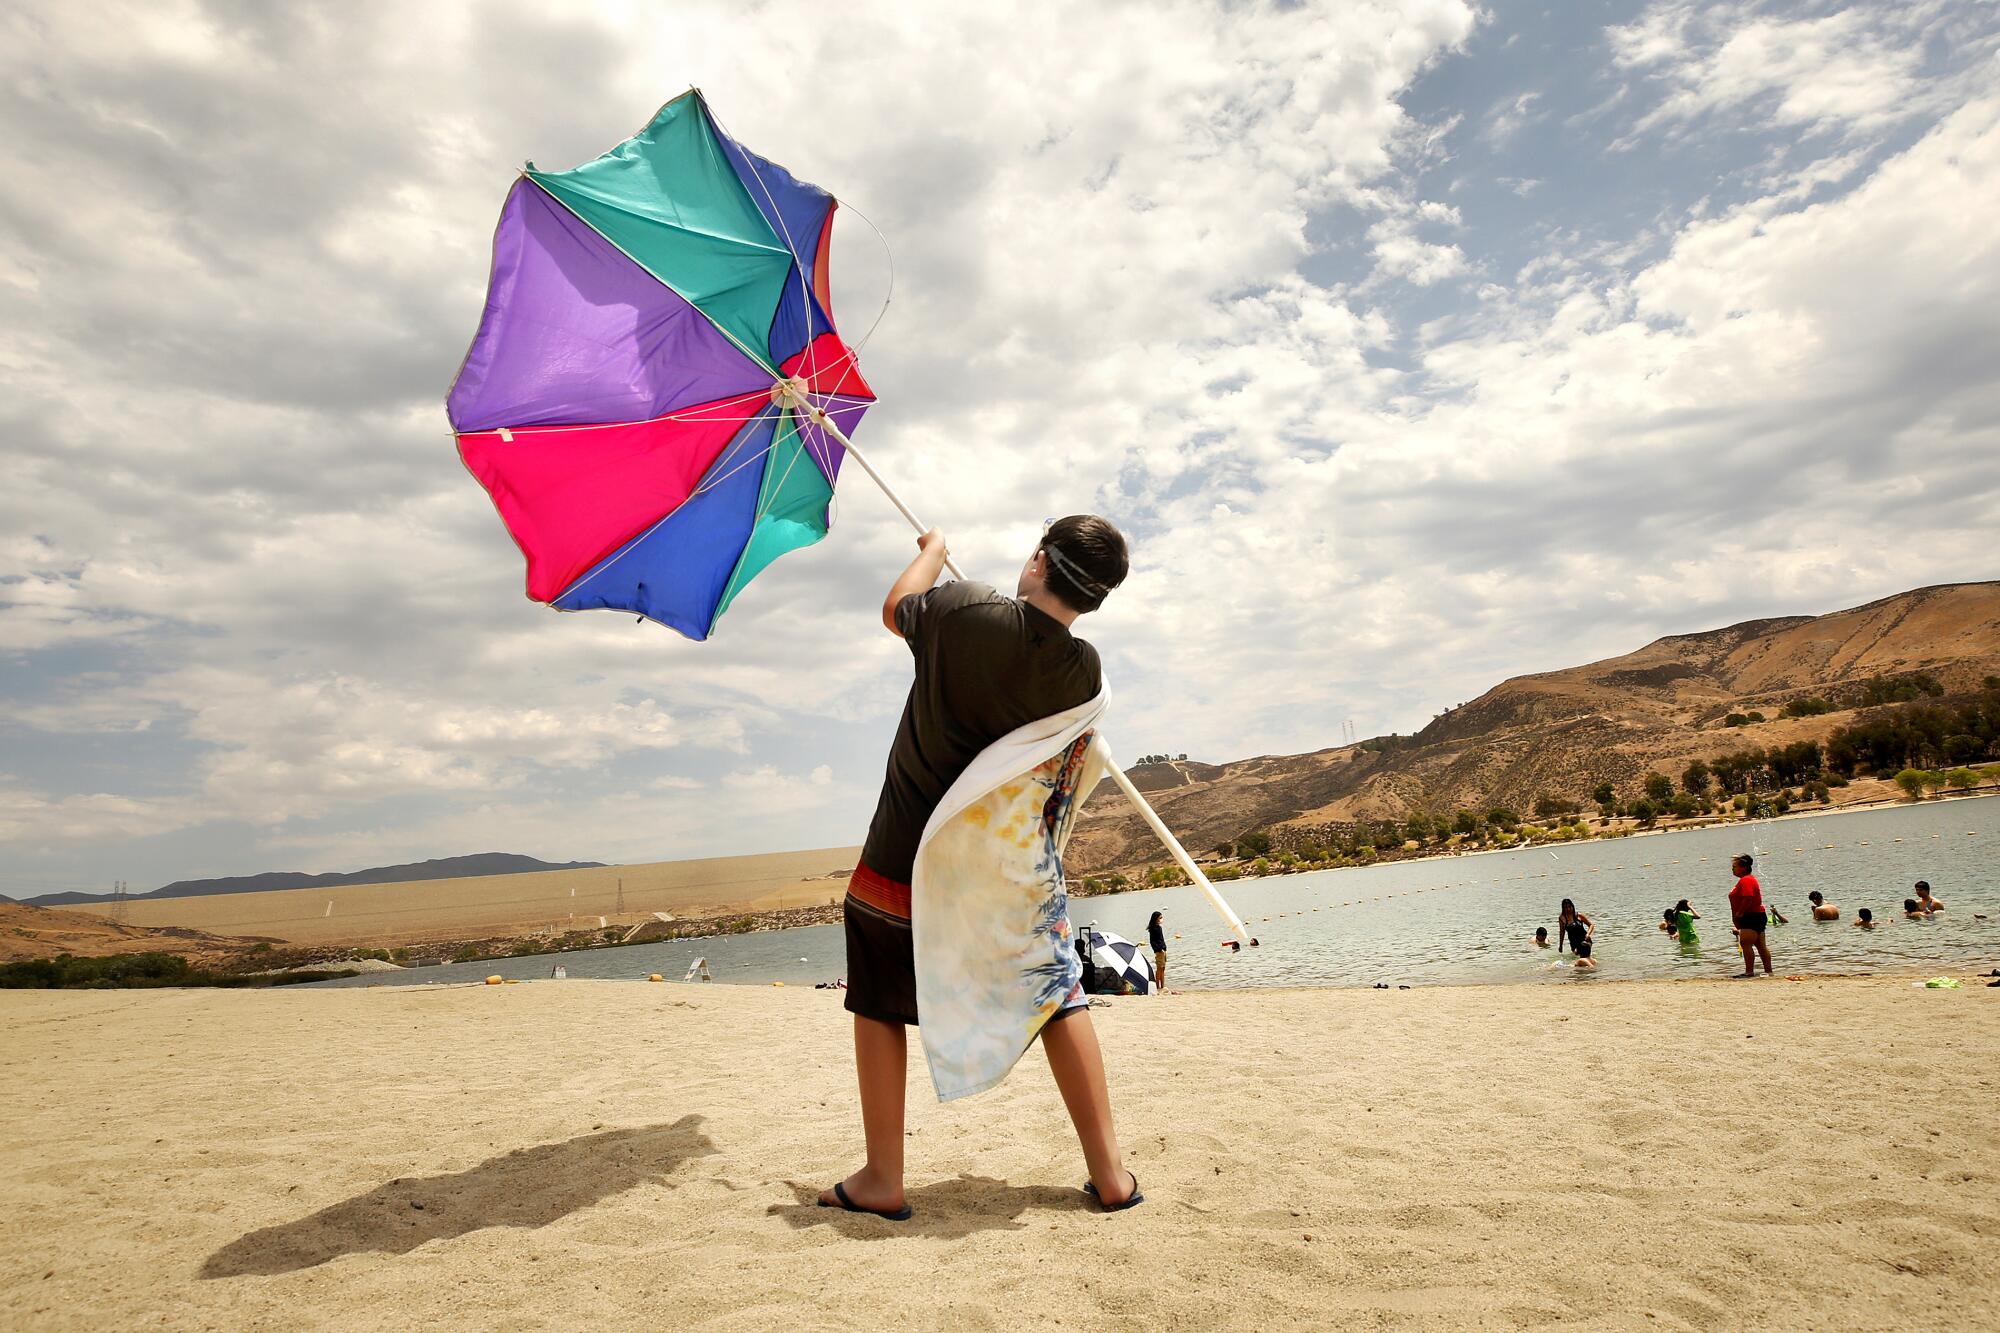 A boy on a sandy lakeshore holds an umbrella turned inside out by wind